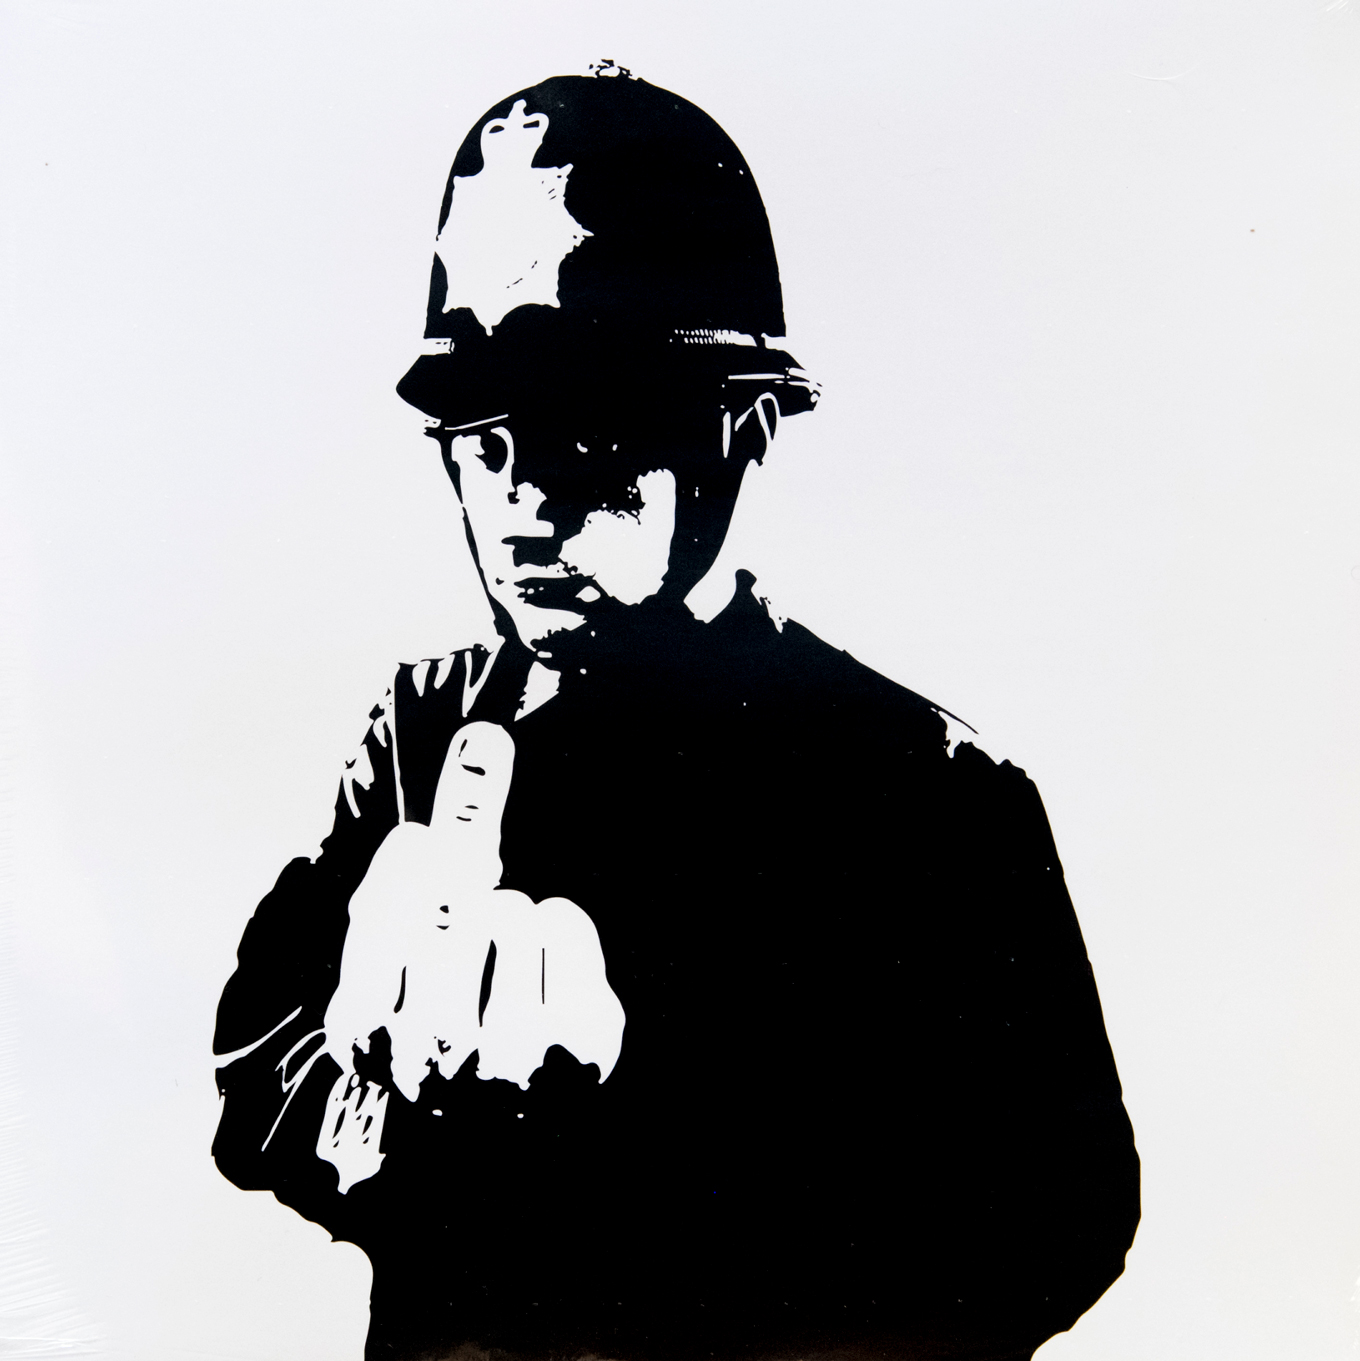 Legal row could finally force mystery artist Banksy to reveal his real name